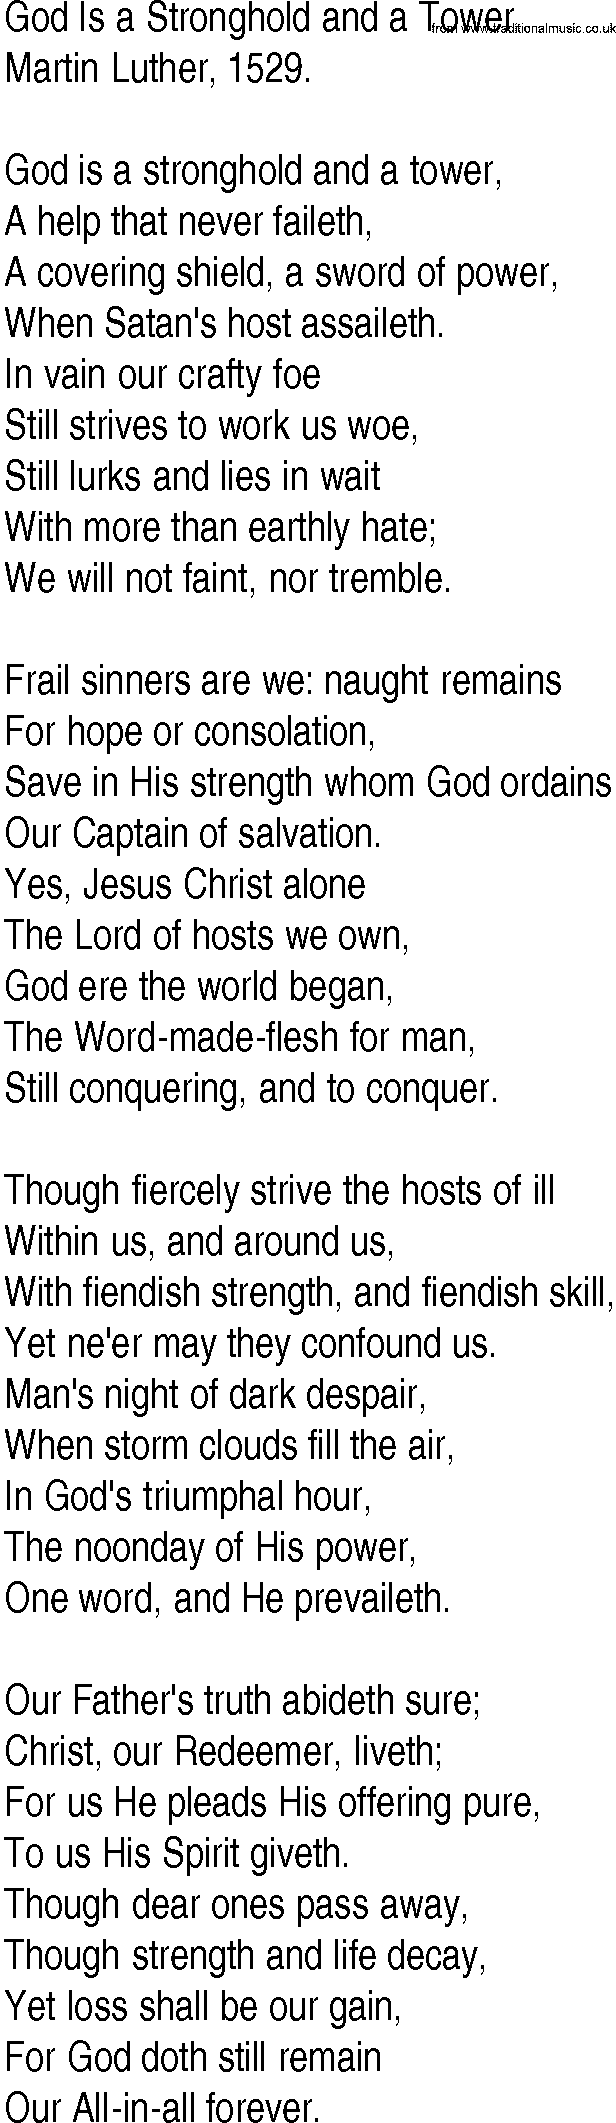 Hymn and Gospel Song: God Is a Stronghold and a Tower by Martin Luther lyrics